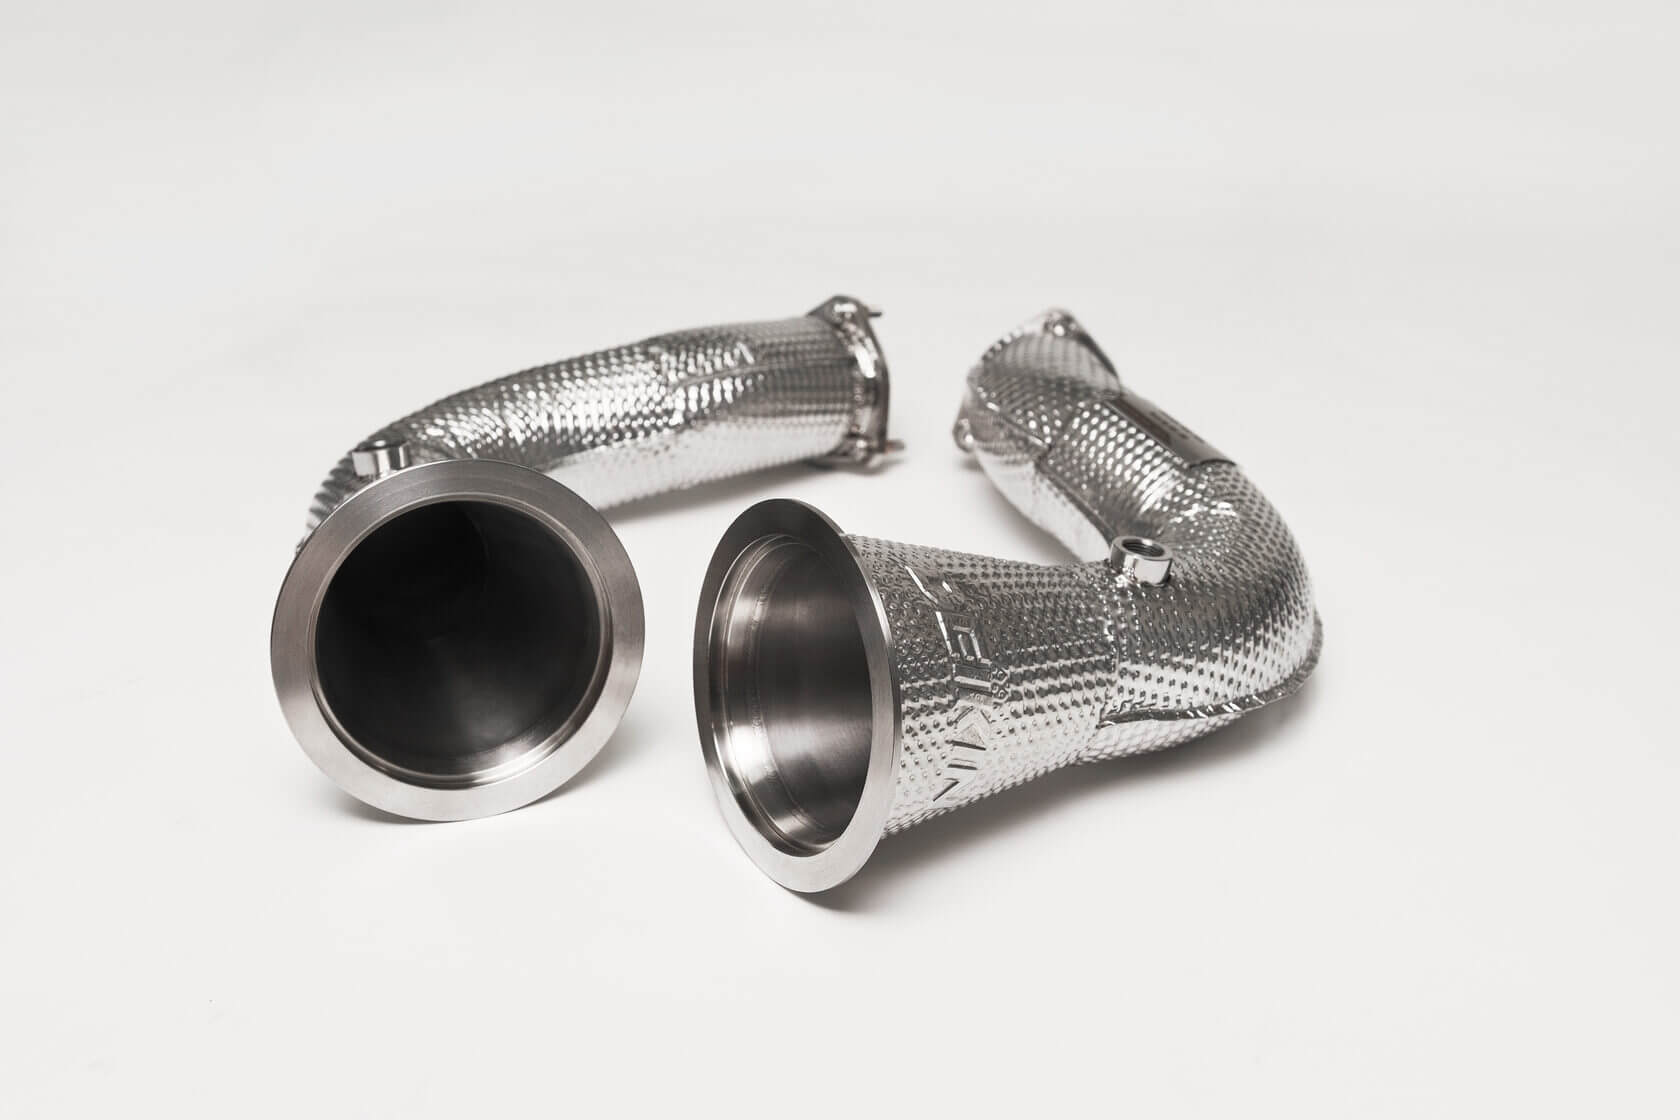 DEIKIN 10-AUDI.RS.Q8-DP Downpipe for Audi RS Q8 without HeatShield Photo-0 